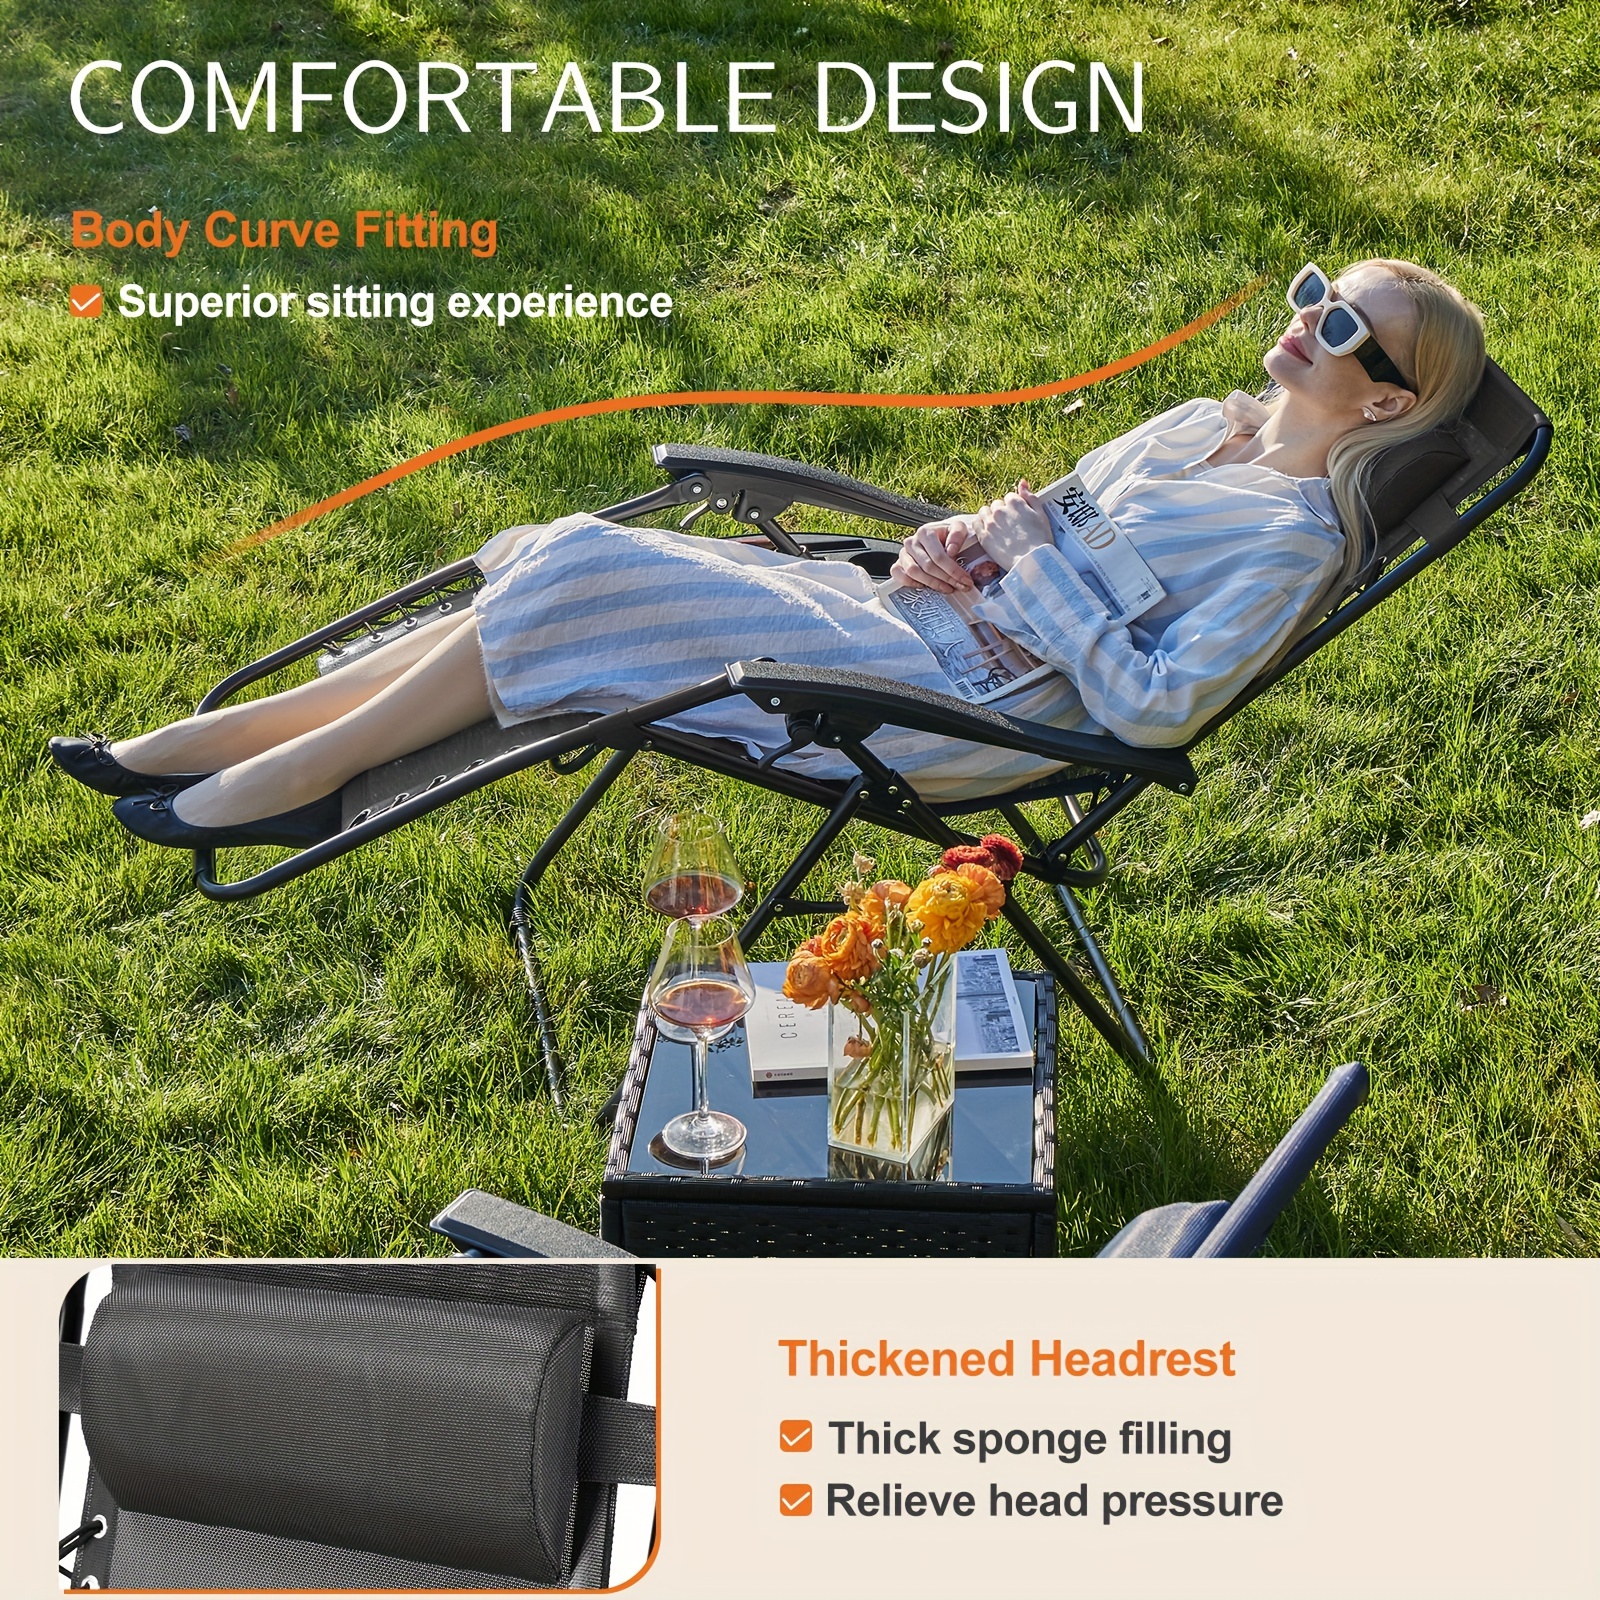 OLIXIS Zero   Set of 2, Patio Outdoor Folding Lounge Chair with Cup Holder Trays and Adjustable Pillow, Recliner Beach Camping Chairs for Poolside, Garden, Backyard, Lawn details 4